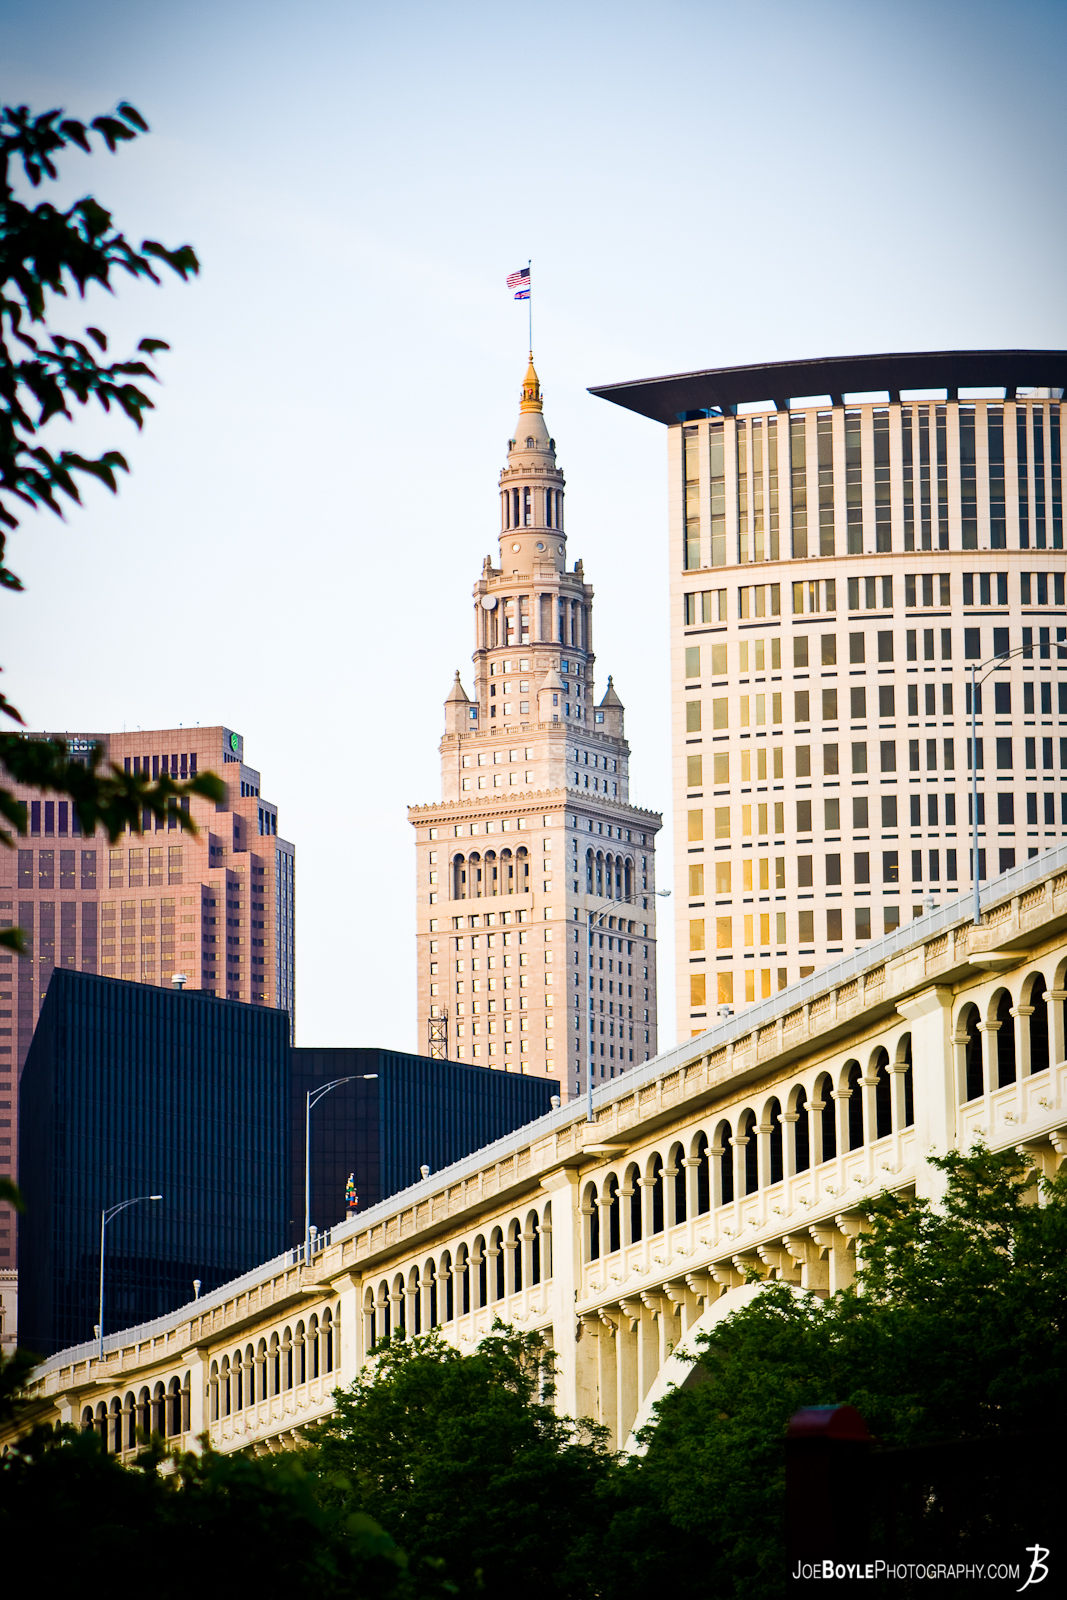  A photo of two history laden structures in Cleveland Ohio. The Terminal Tower & the Veterans Memorial Bridge. The Veterans Bridge is also known as the Detroit-Superior Bridge. 